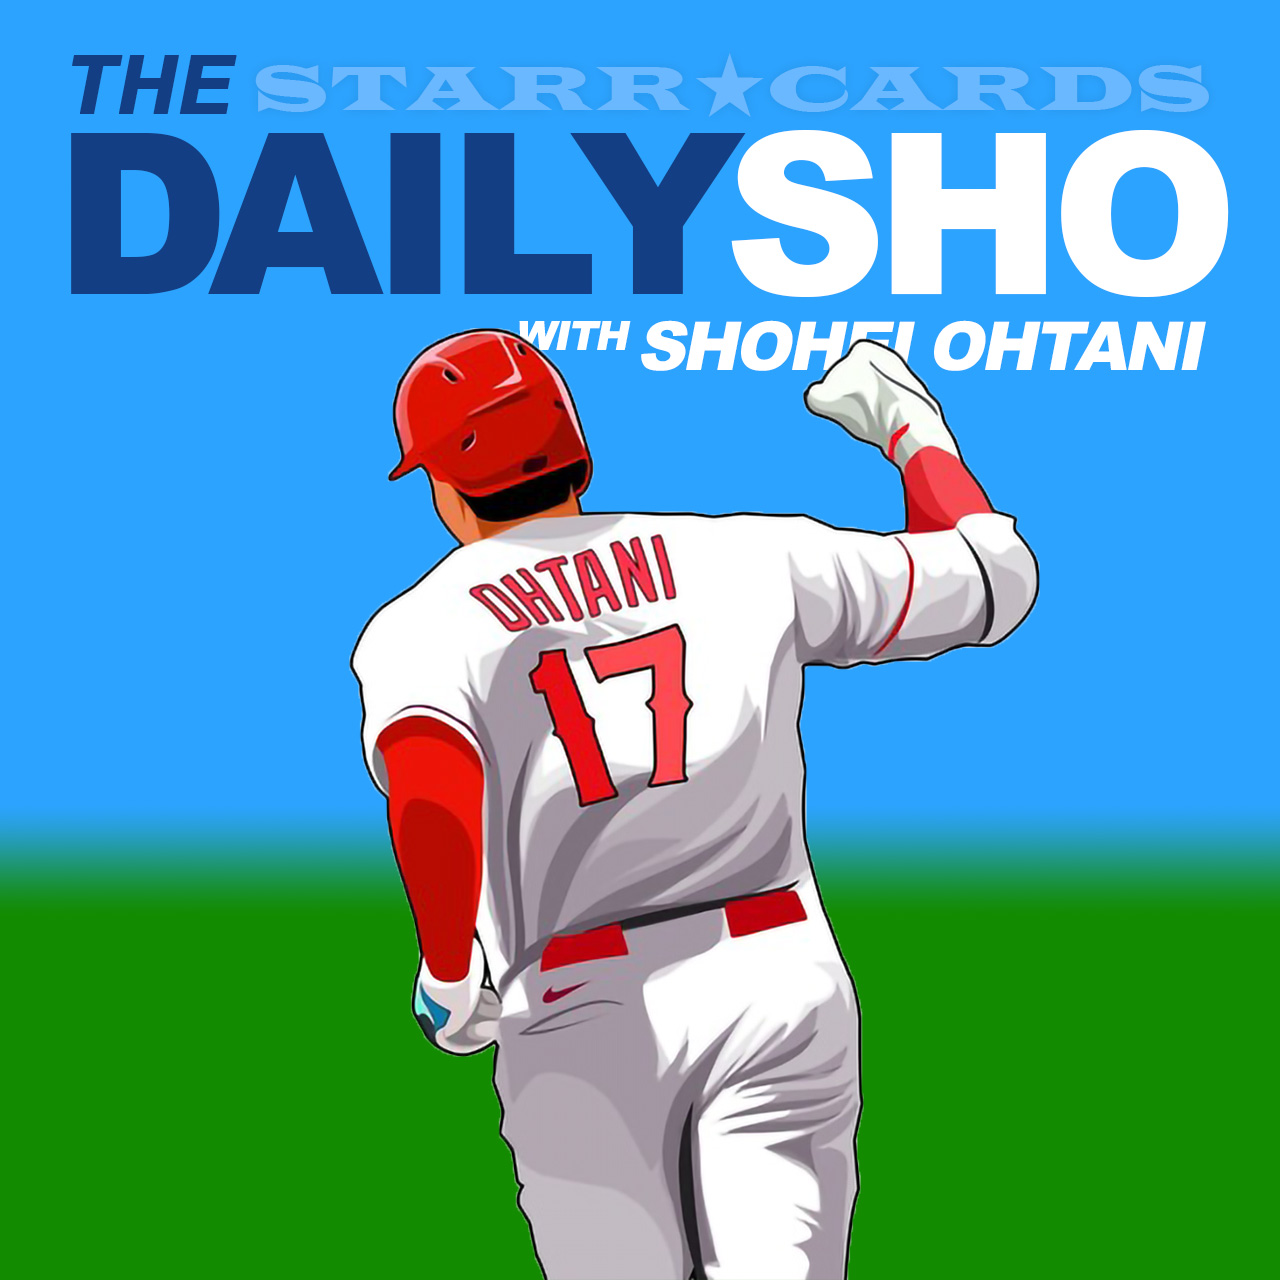 The Daily Sho with Shohei Ohtani trotting after home run